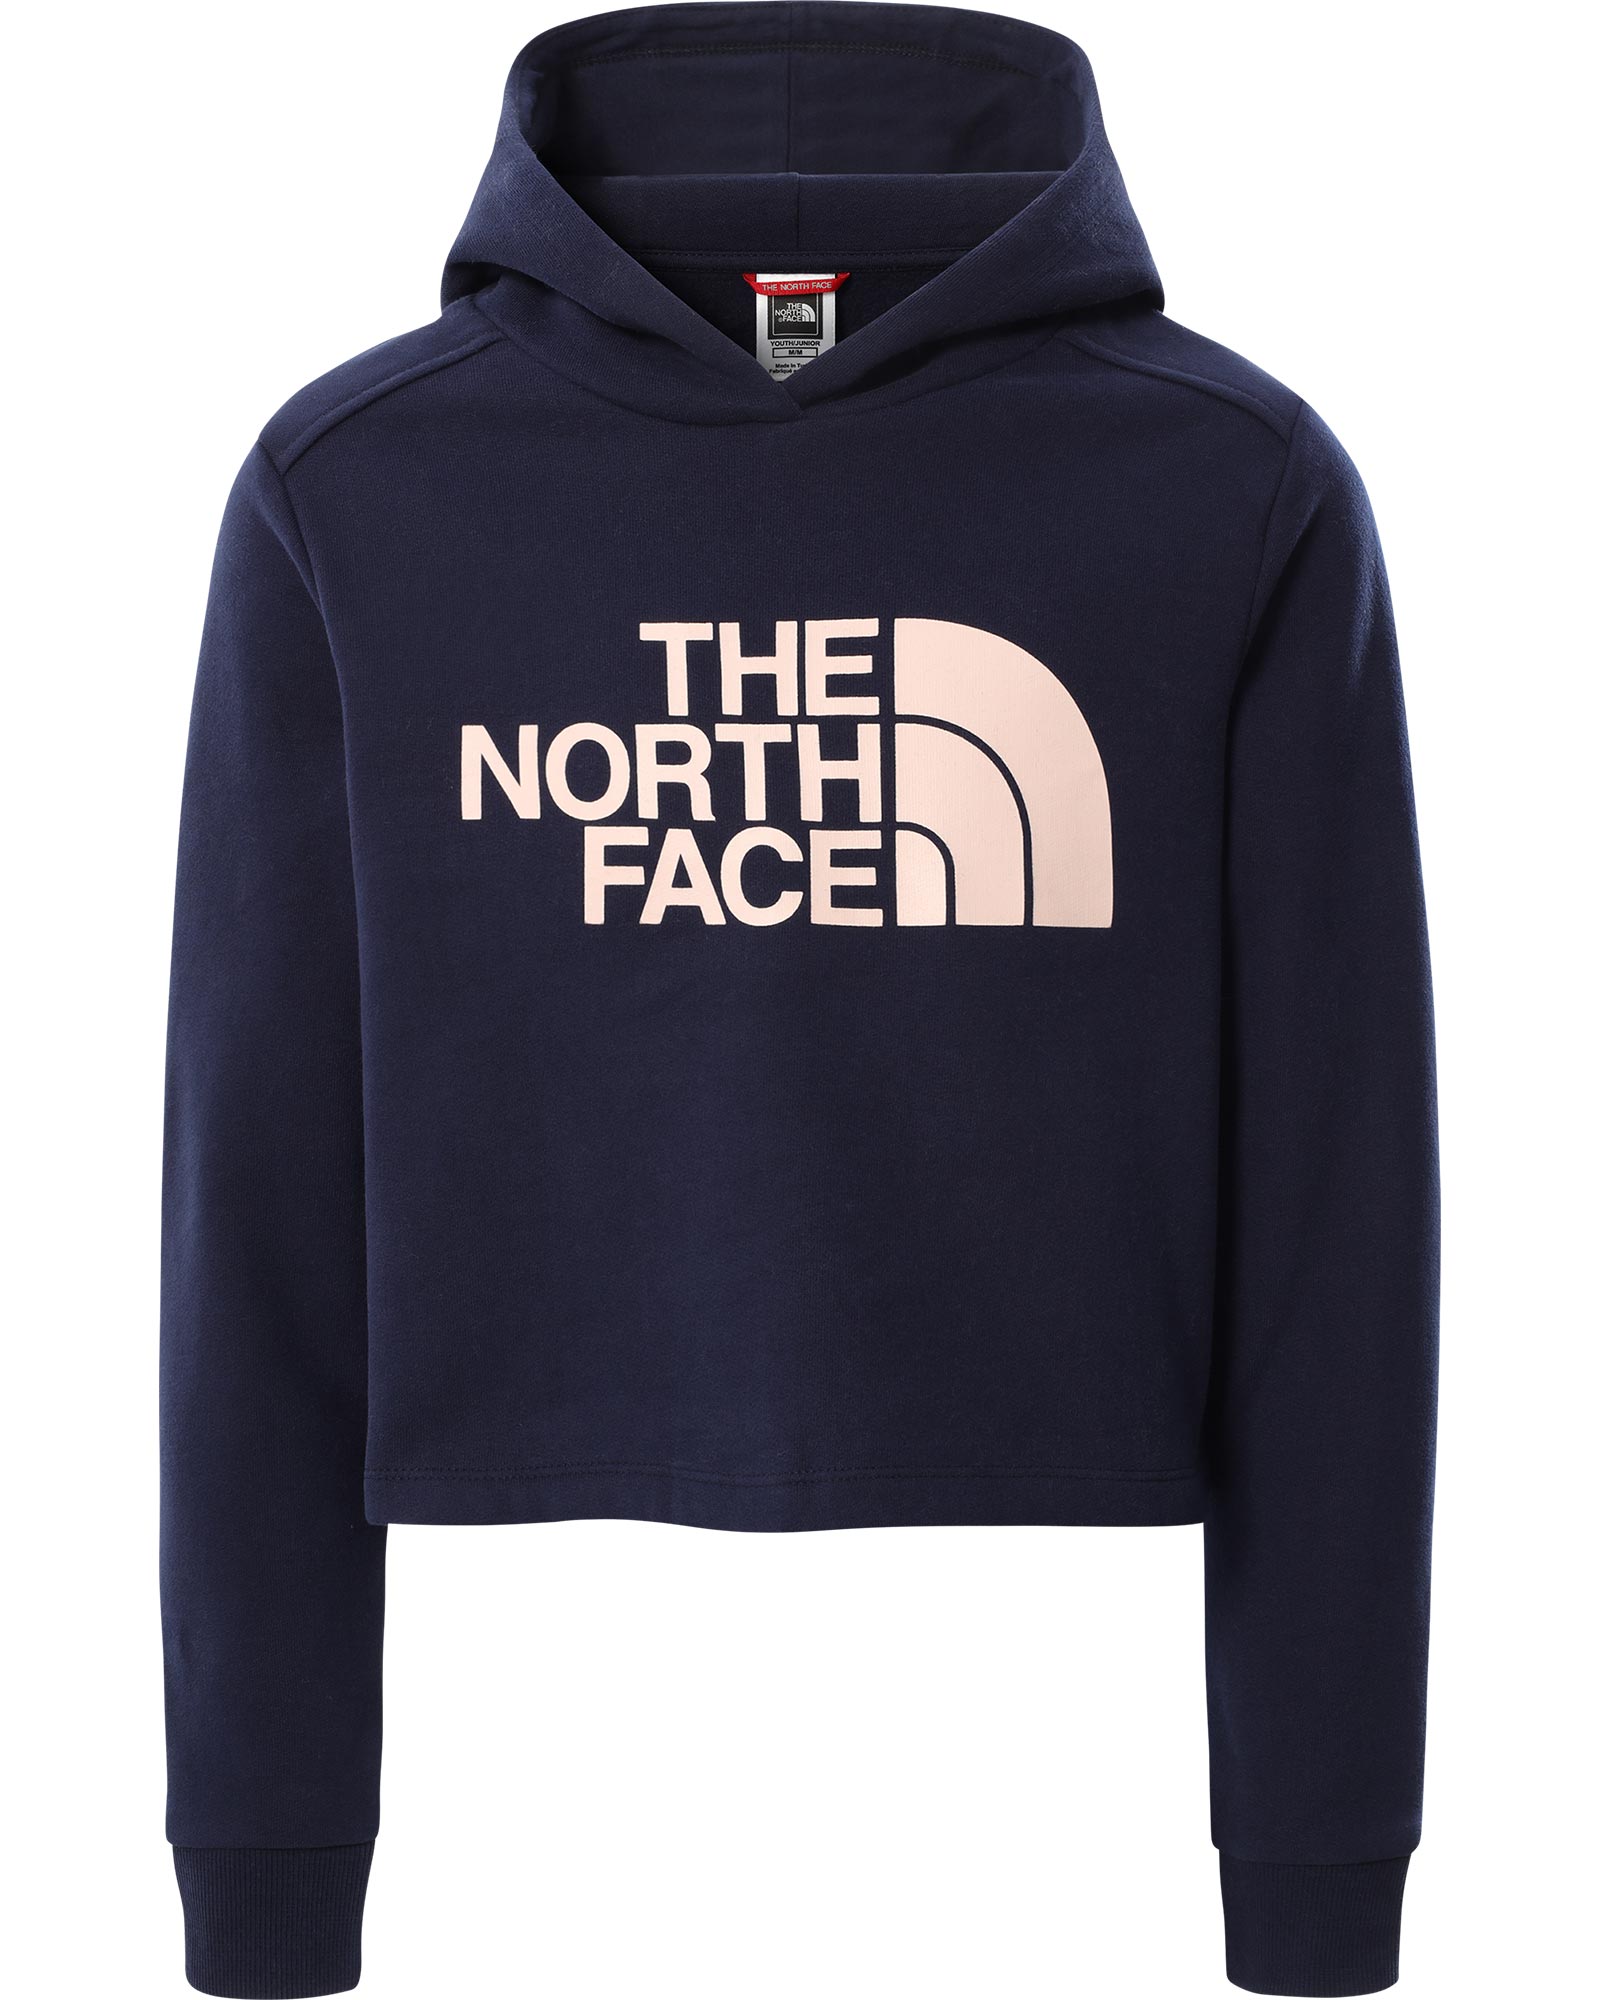 The North Face Drew Peak Cropped P/o Girls Hoodie